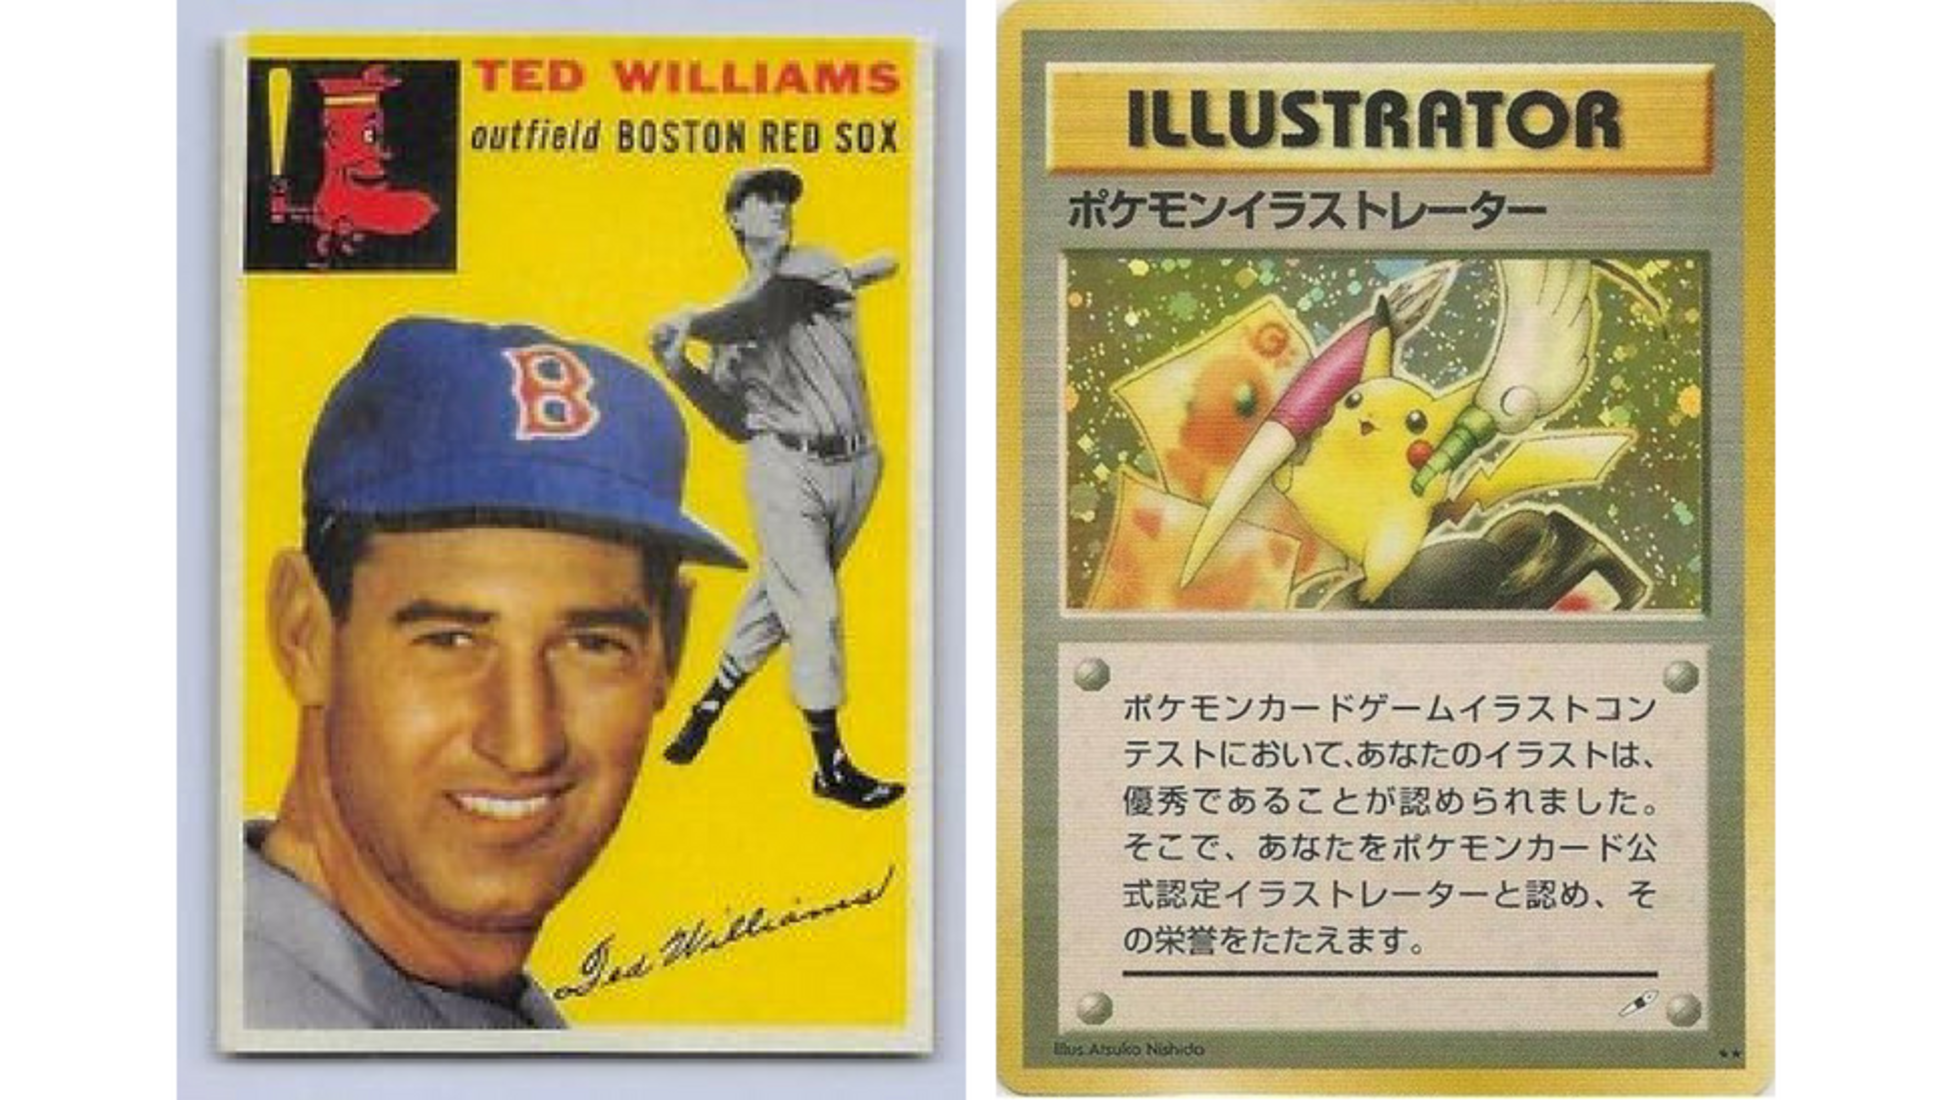 Top 10 Most Expensive Trading Cards Ever Sold - Catawiki